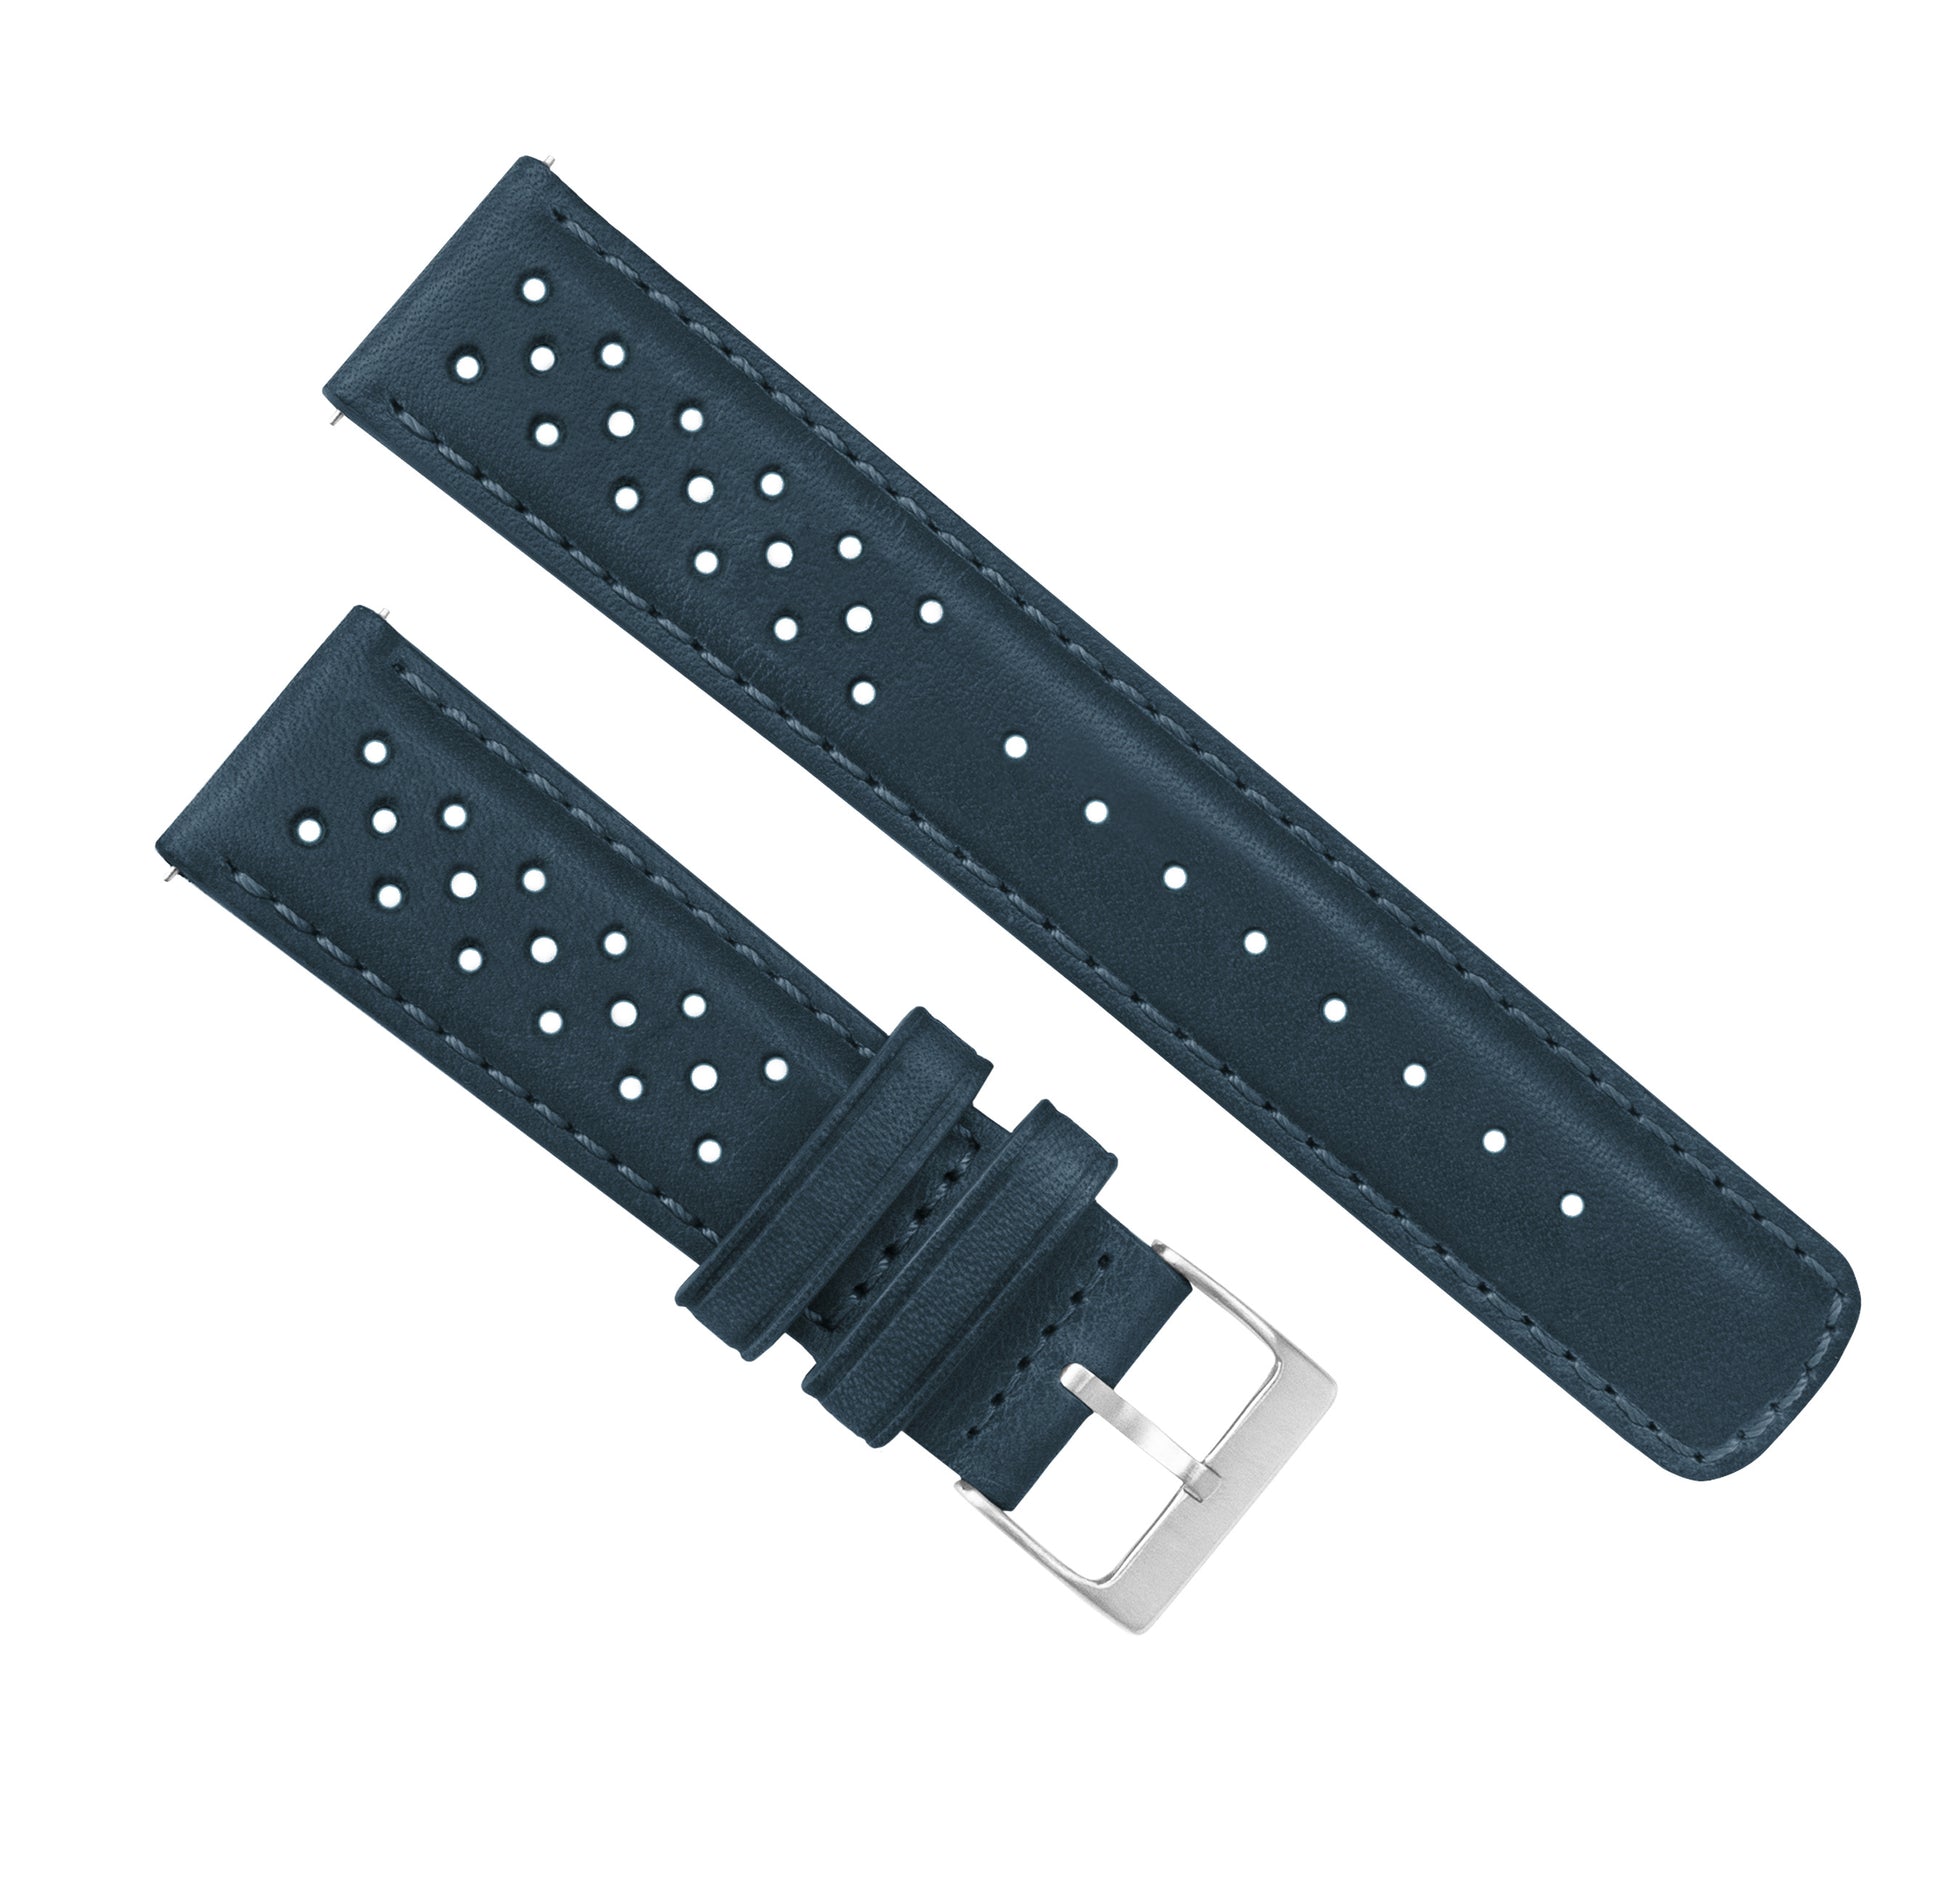 Fossil Sport | Racing Horween Leather | Navy Blue - Barton Watch Bands